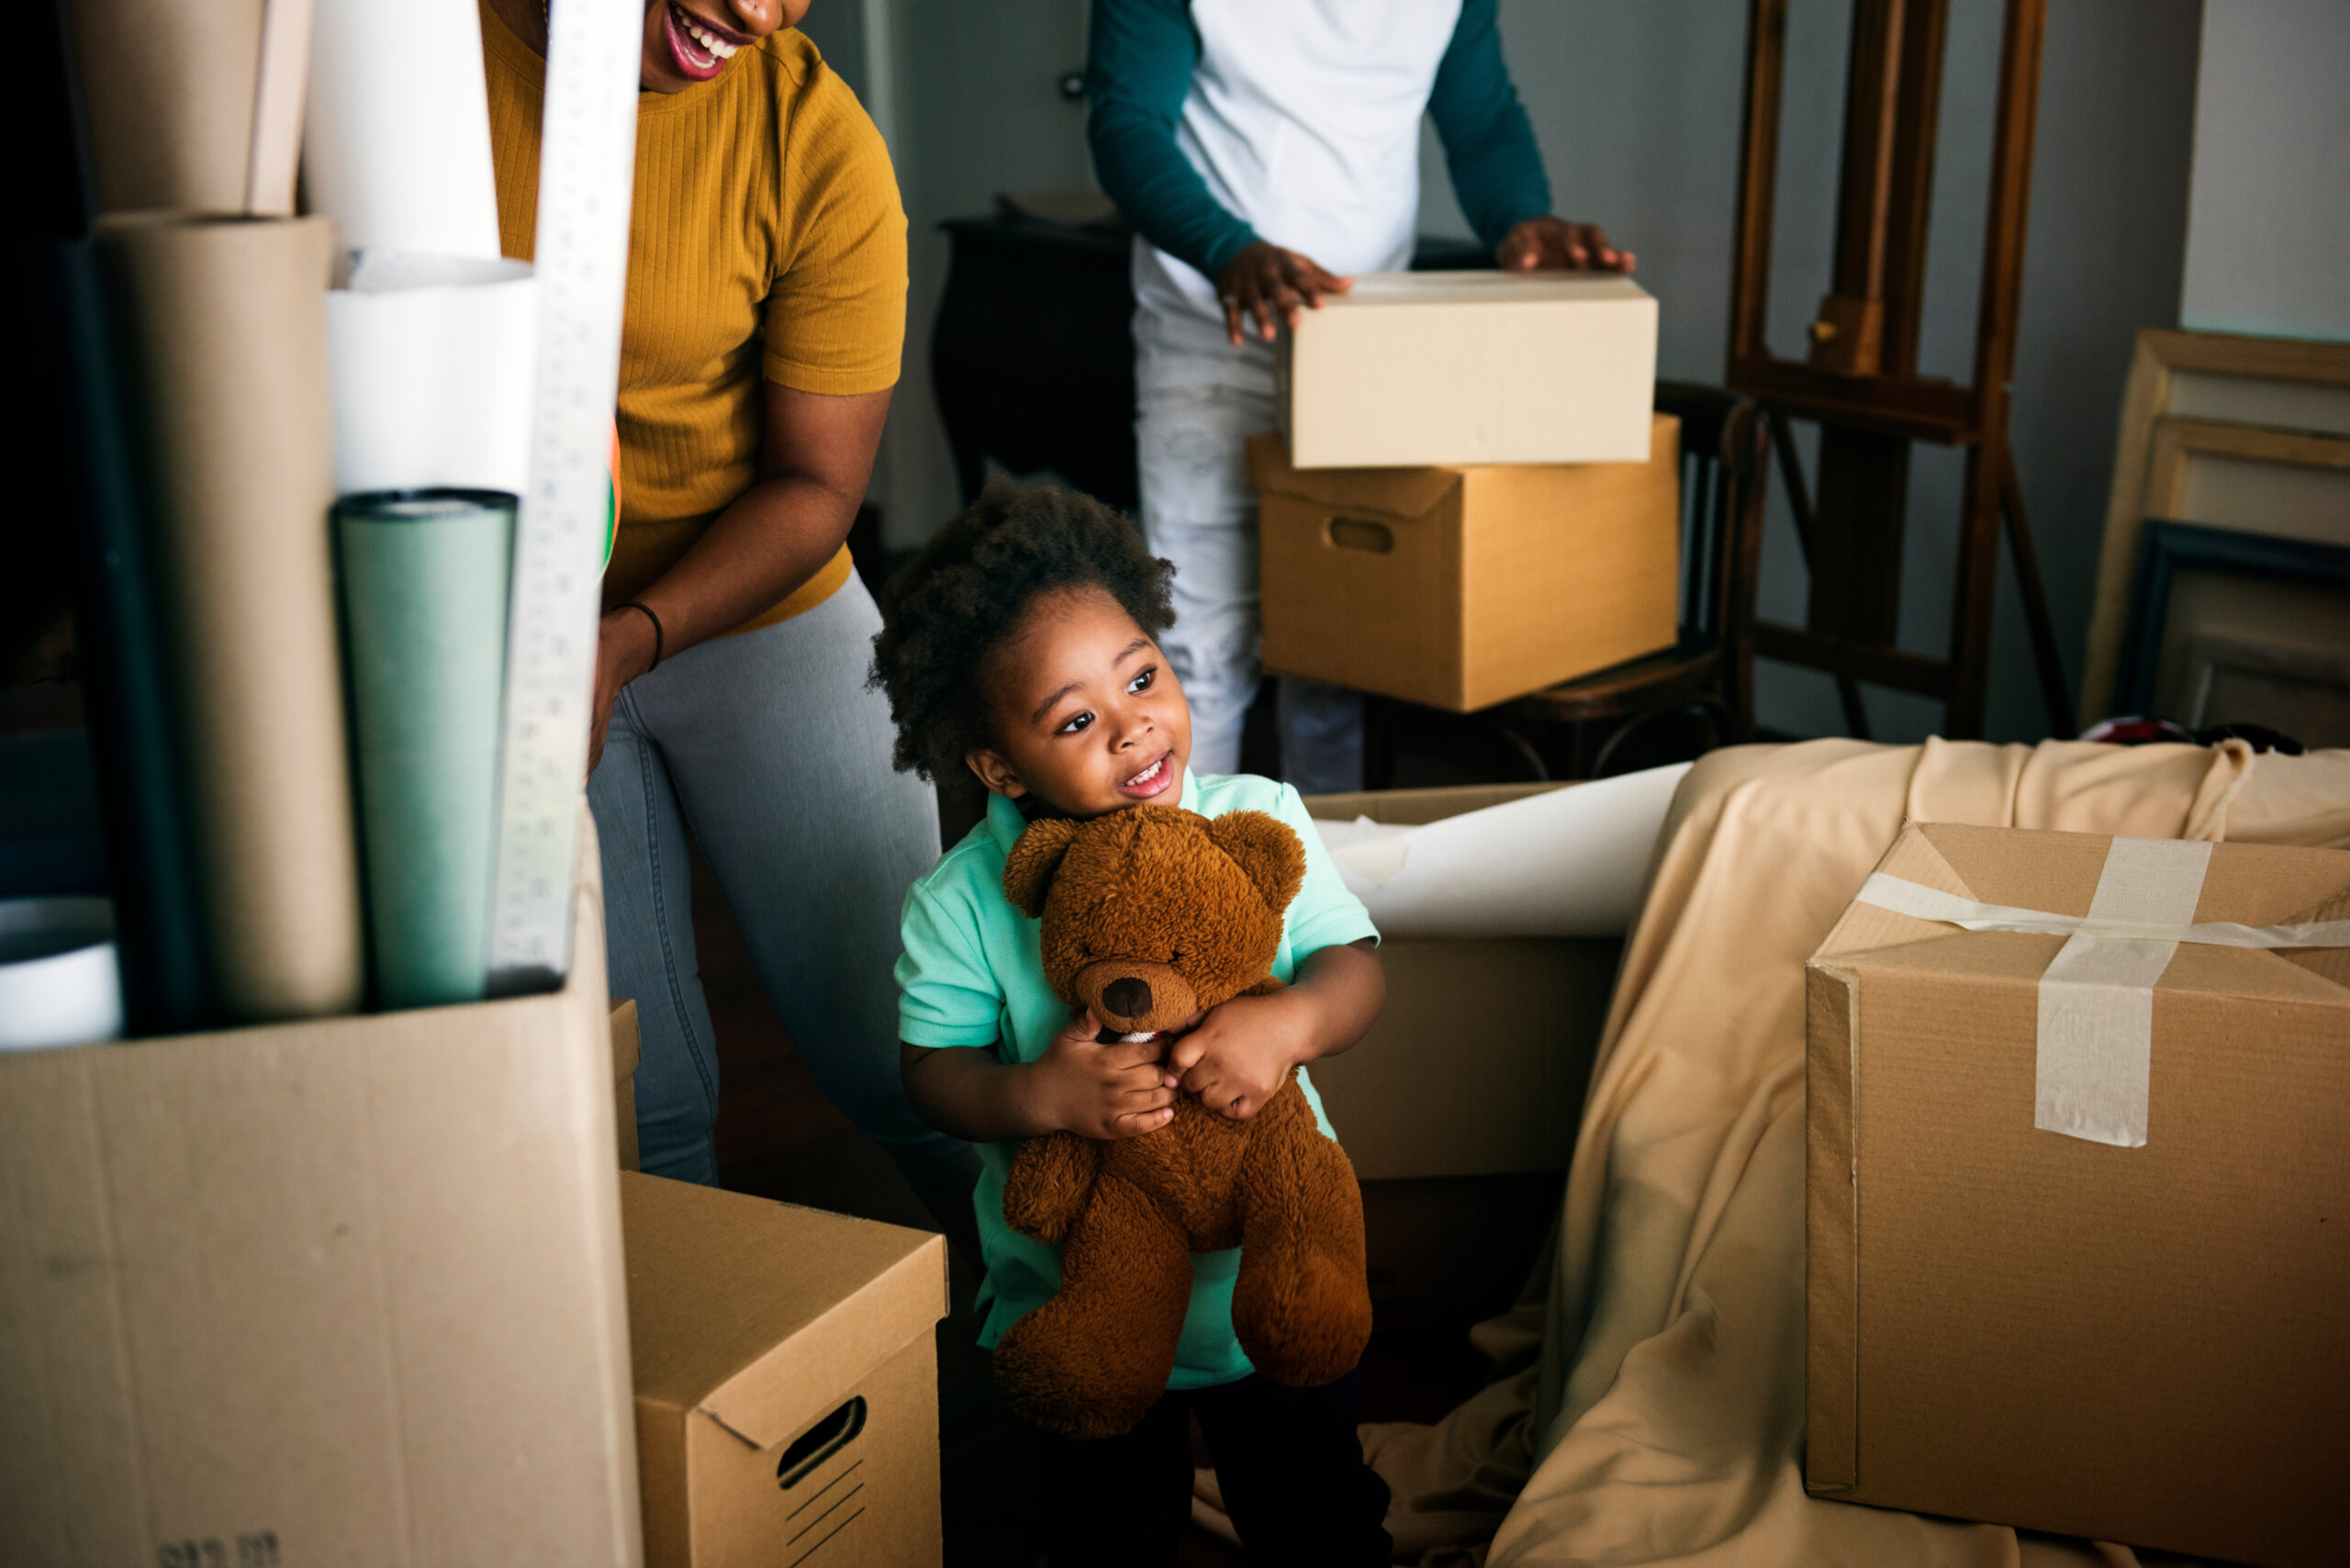 Family packing up boxes for a home move. Child holding teddy bear